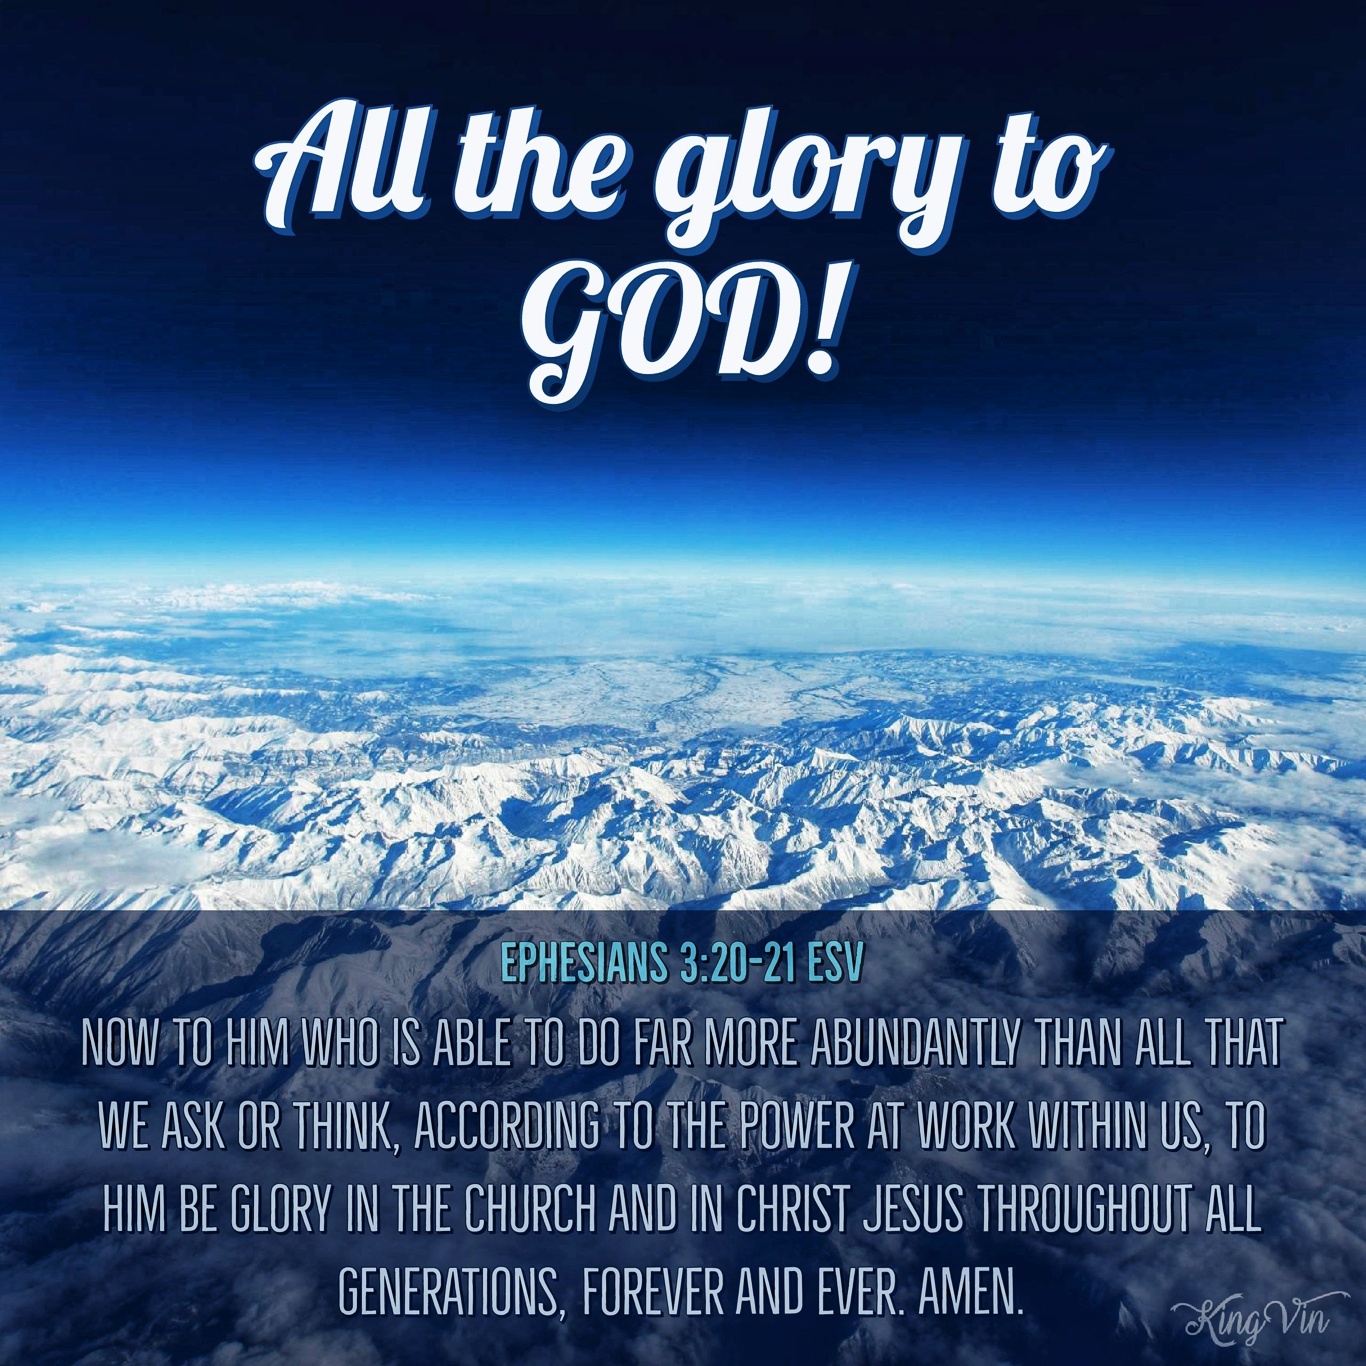 Now to him who is able to do far more abundantly than all that we ask or think, according to the power at work within us, to him be glory in the church and in Christ Jesus throughout all generations, forever and ever. Amen. Ephesians 3:20‭-‬21 ESV